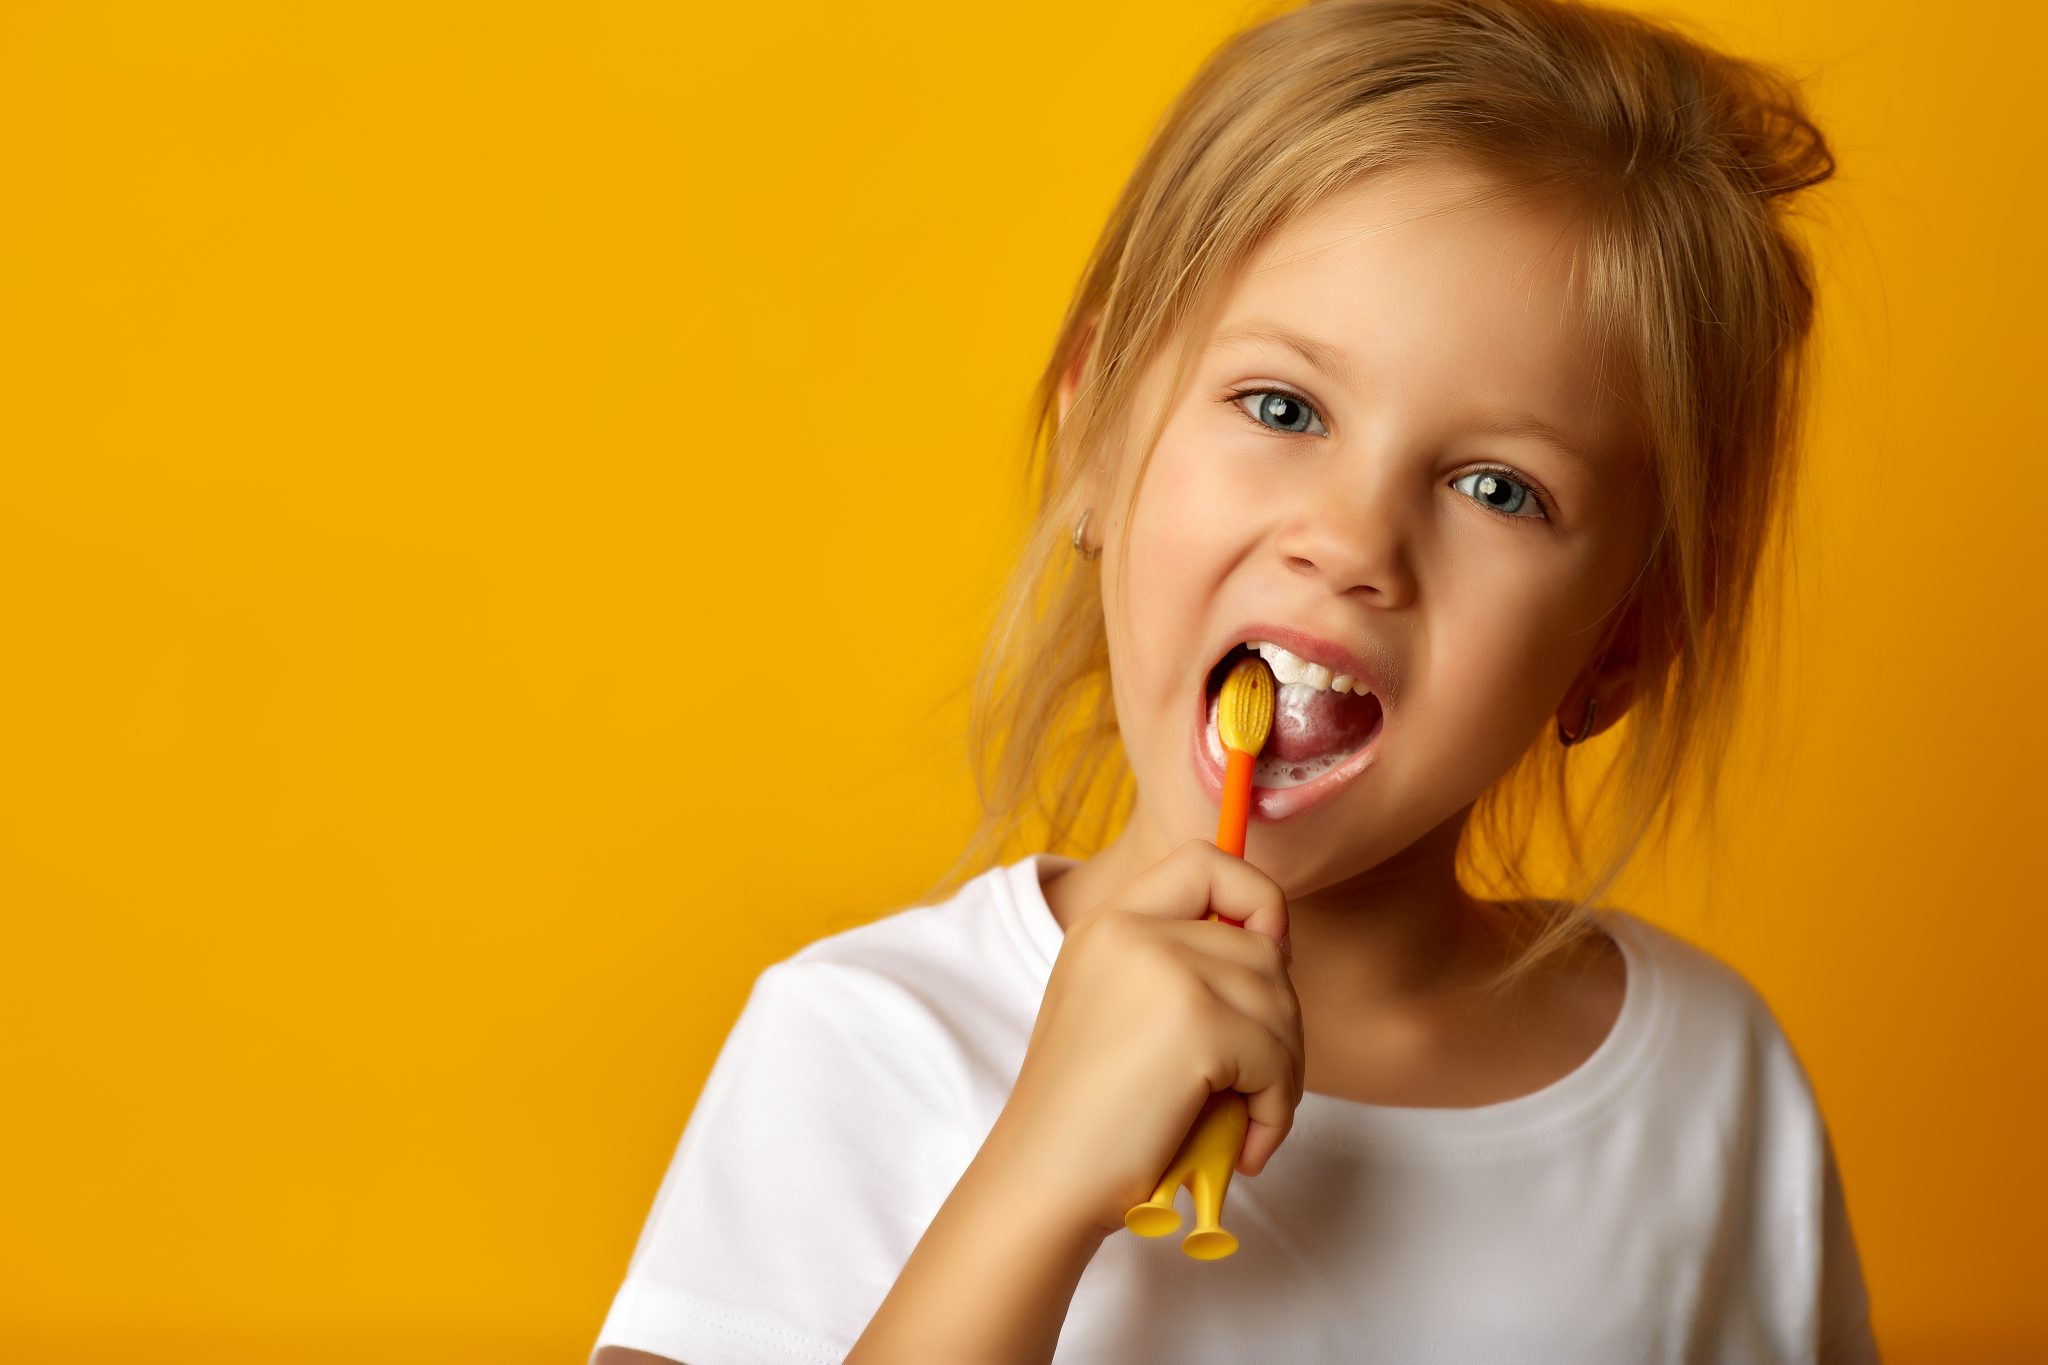 Charming Little Girl In White T Shirt Cleaning Teeth With Colorful Kids Toothbrush Looking At Camera